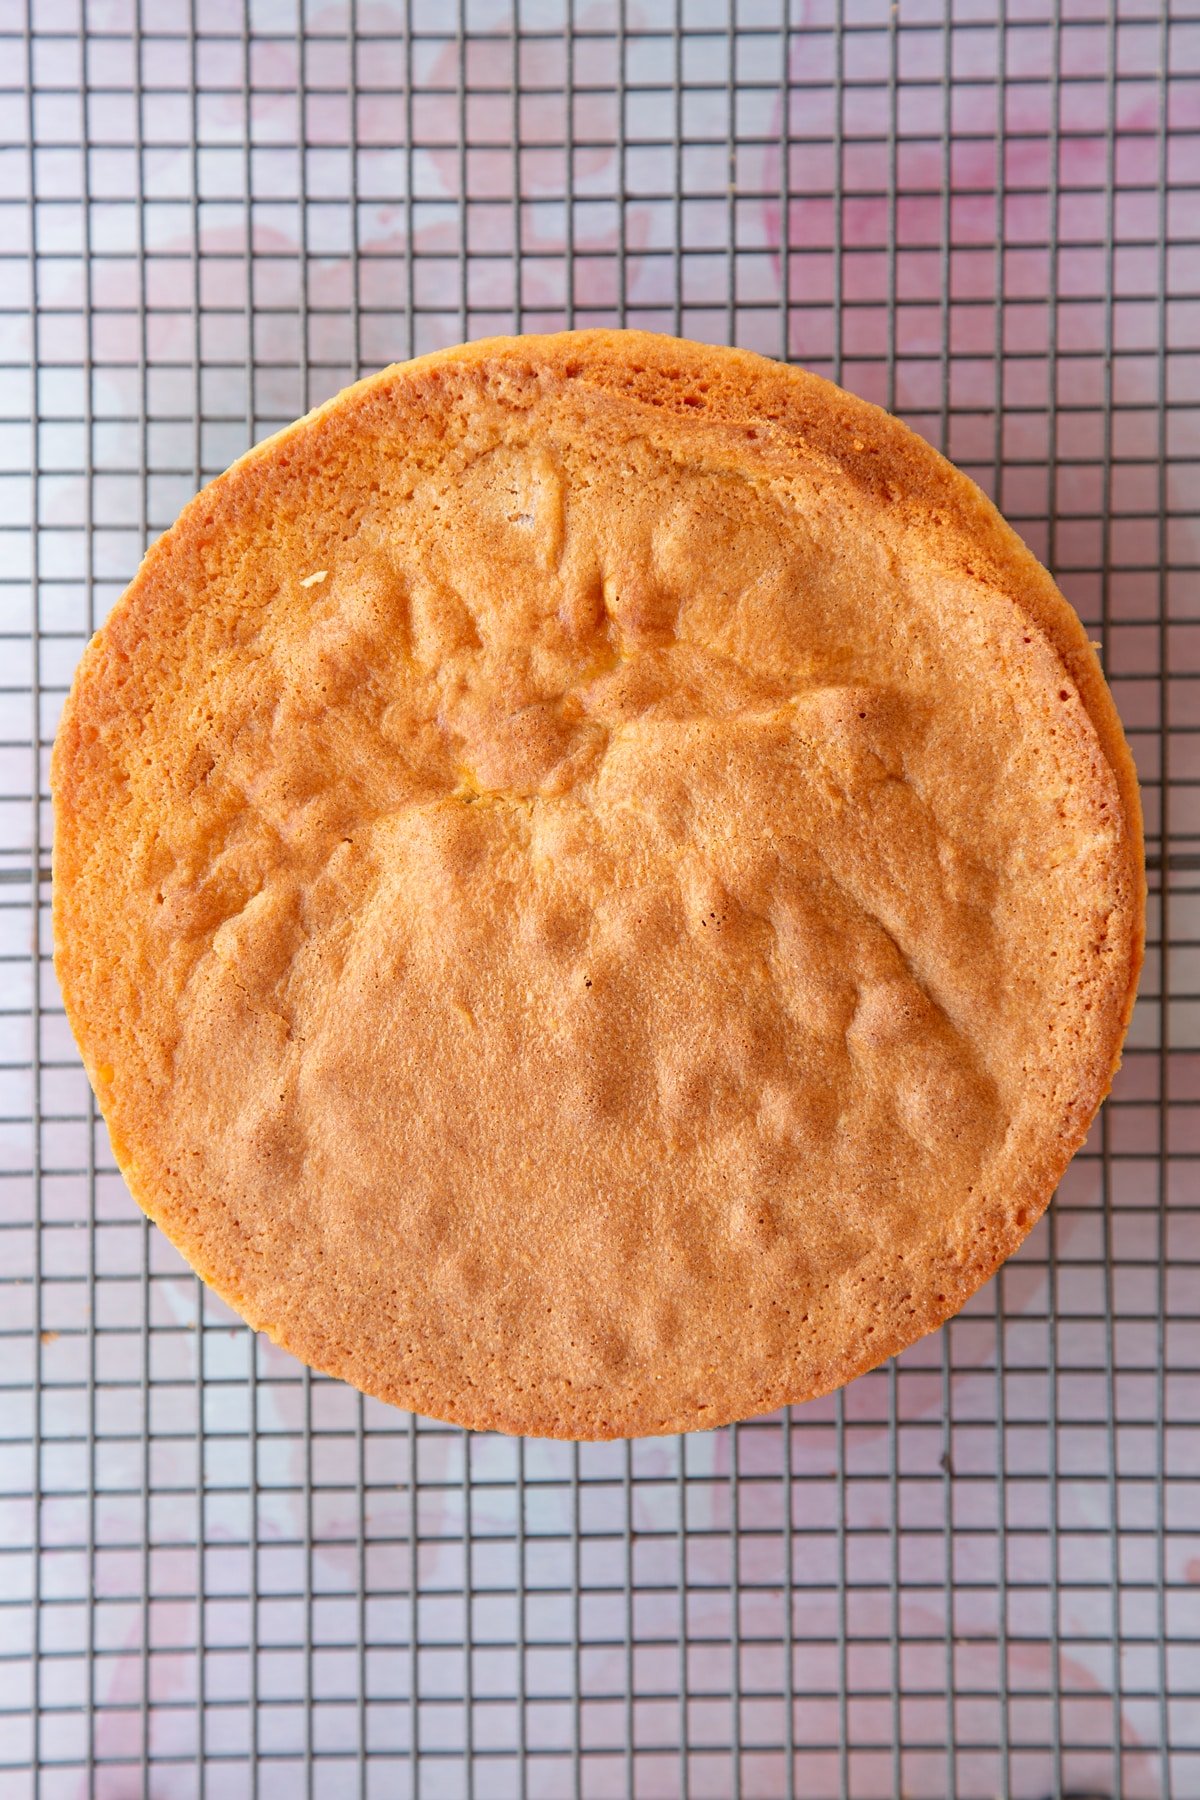 a cooked sponge cake on a wire rack.